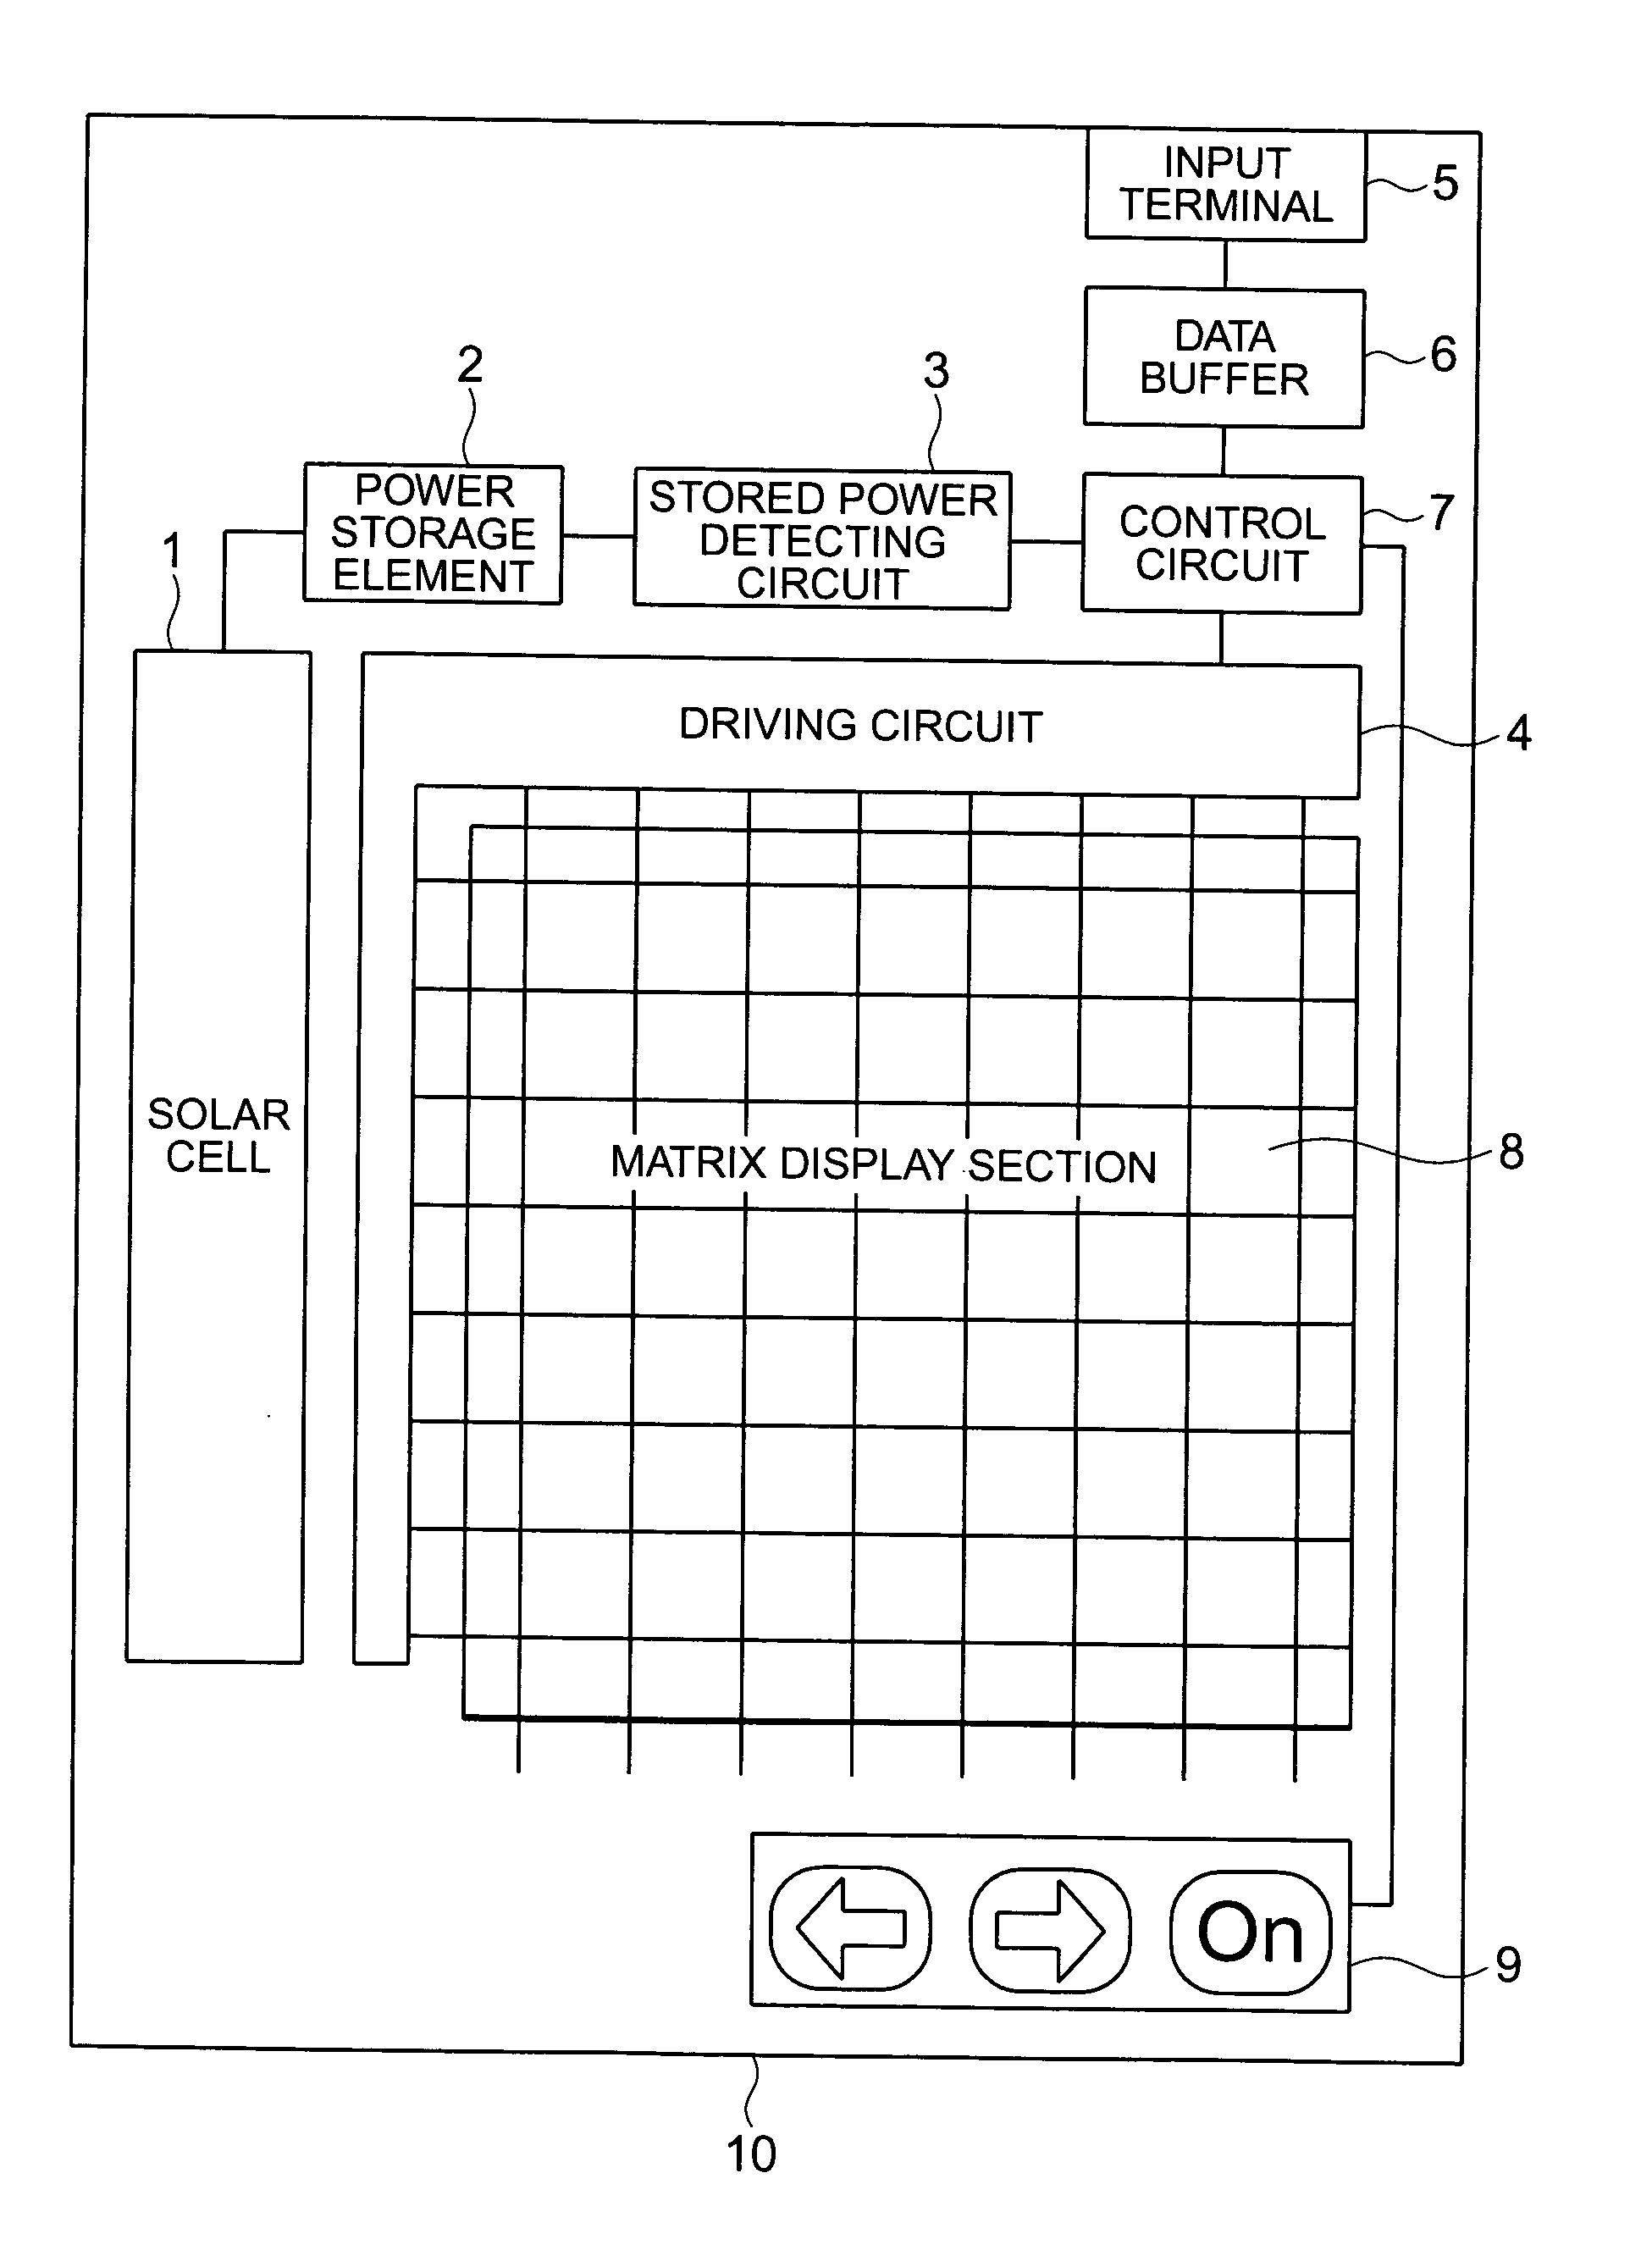 Low-power driven display device